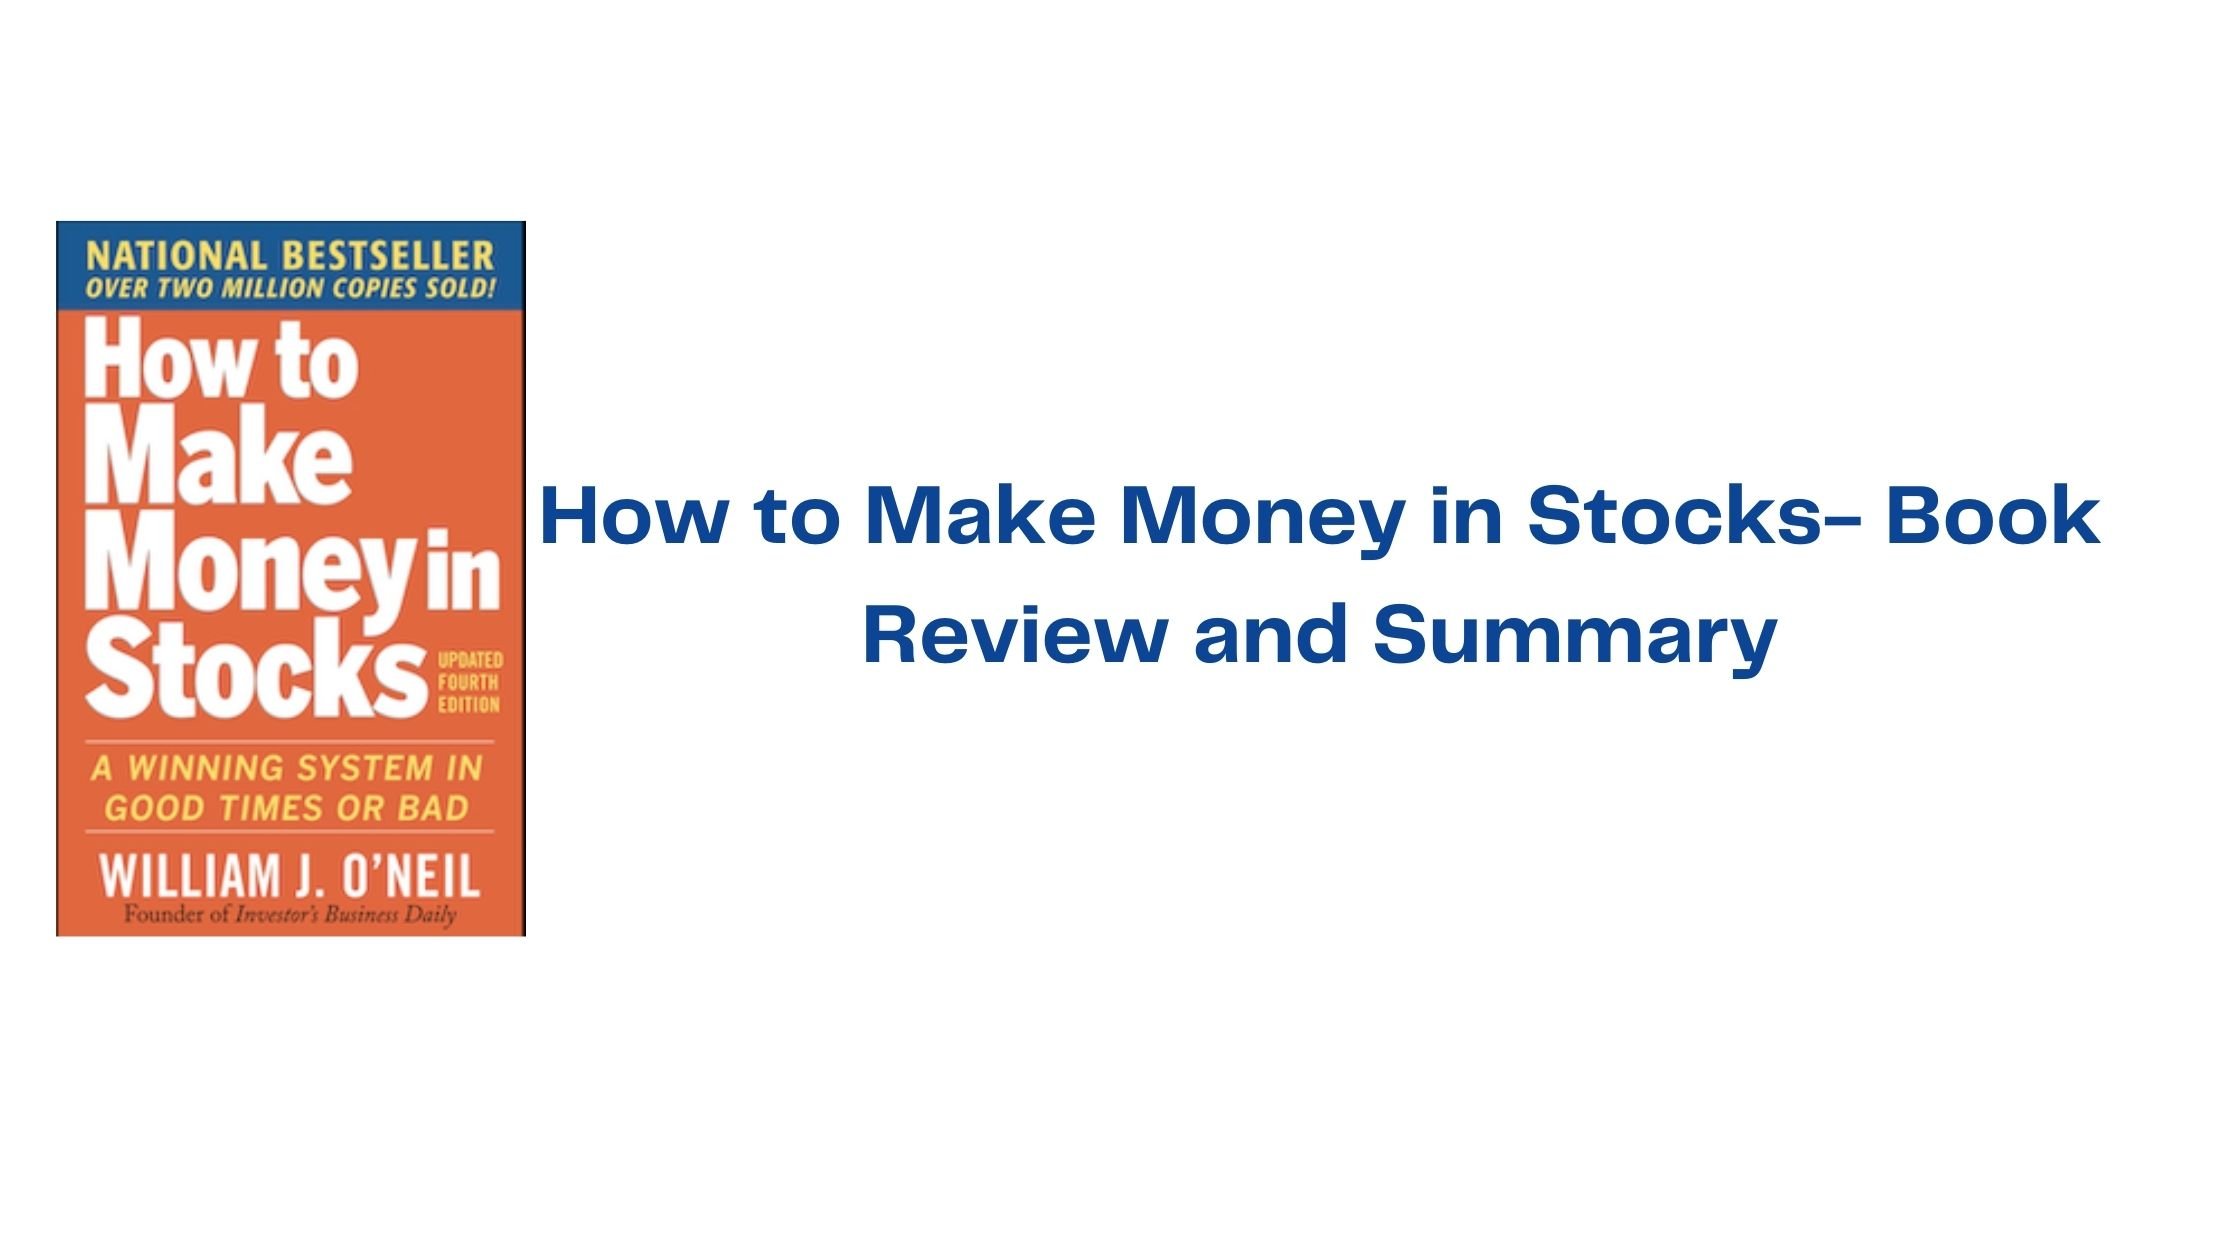 How to Make Money in Stocks- Book Review and Summary